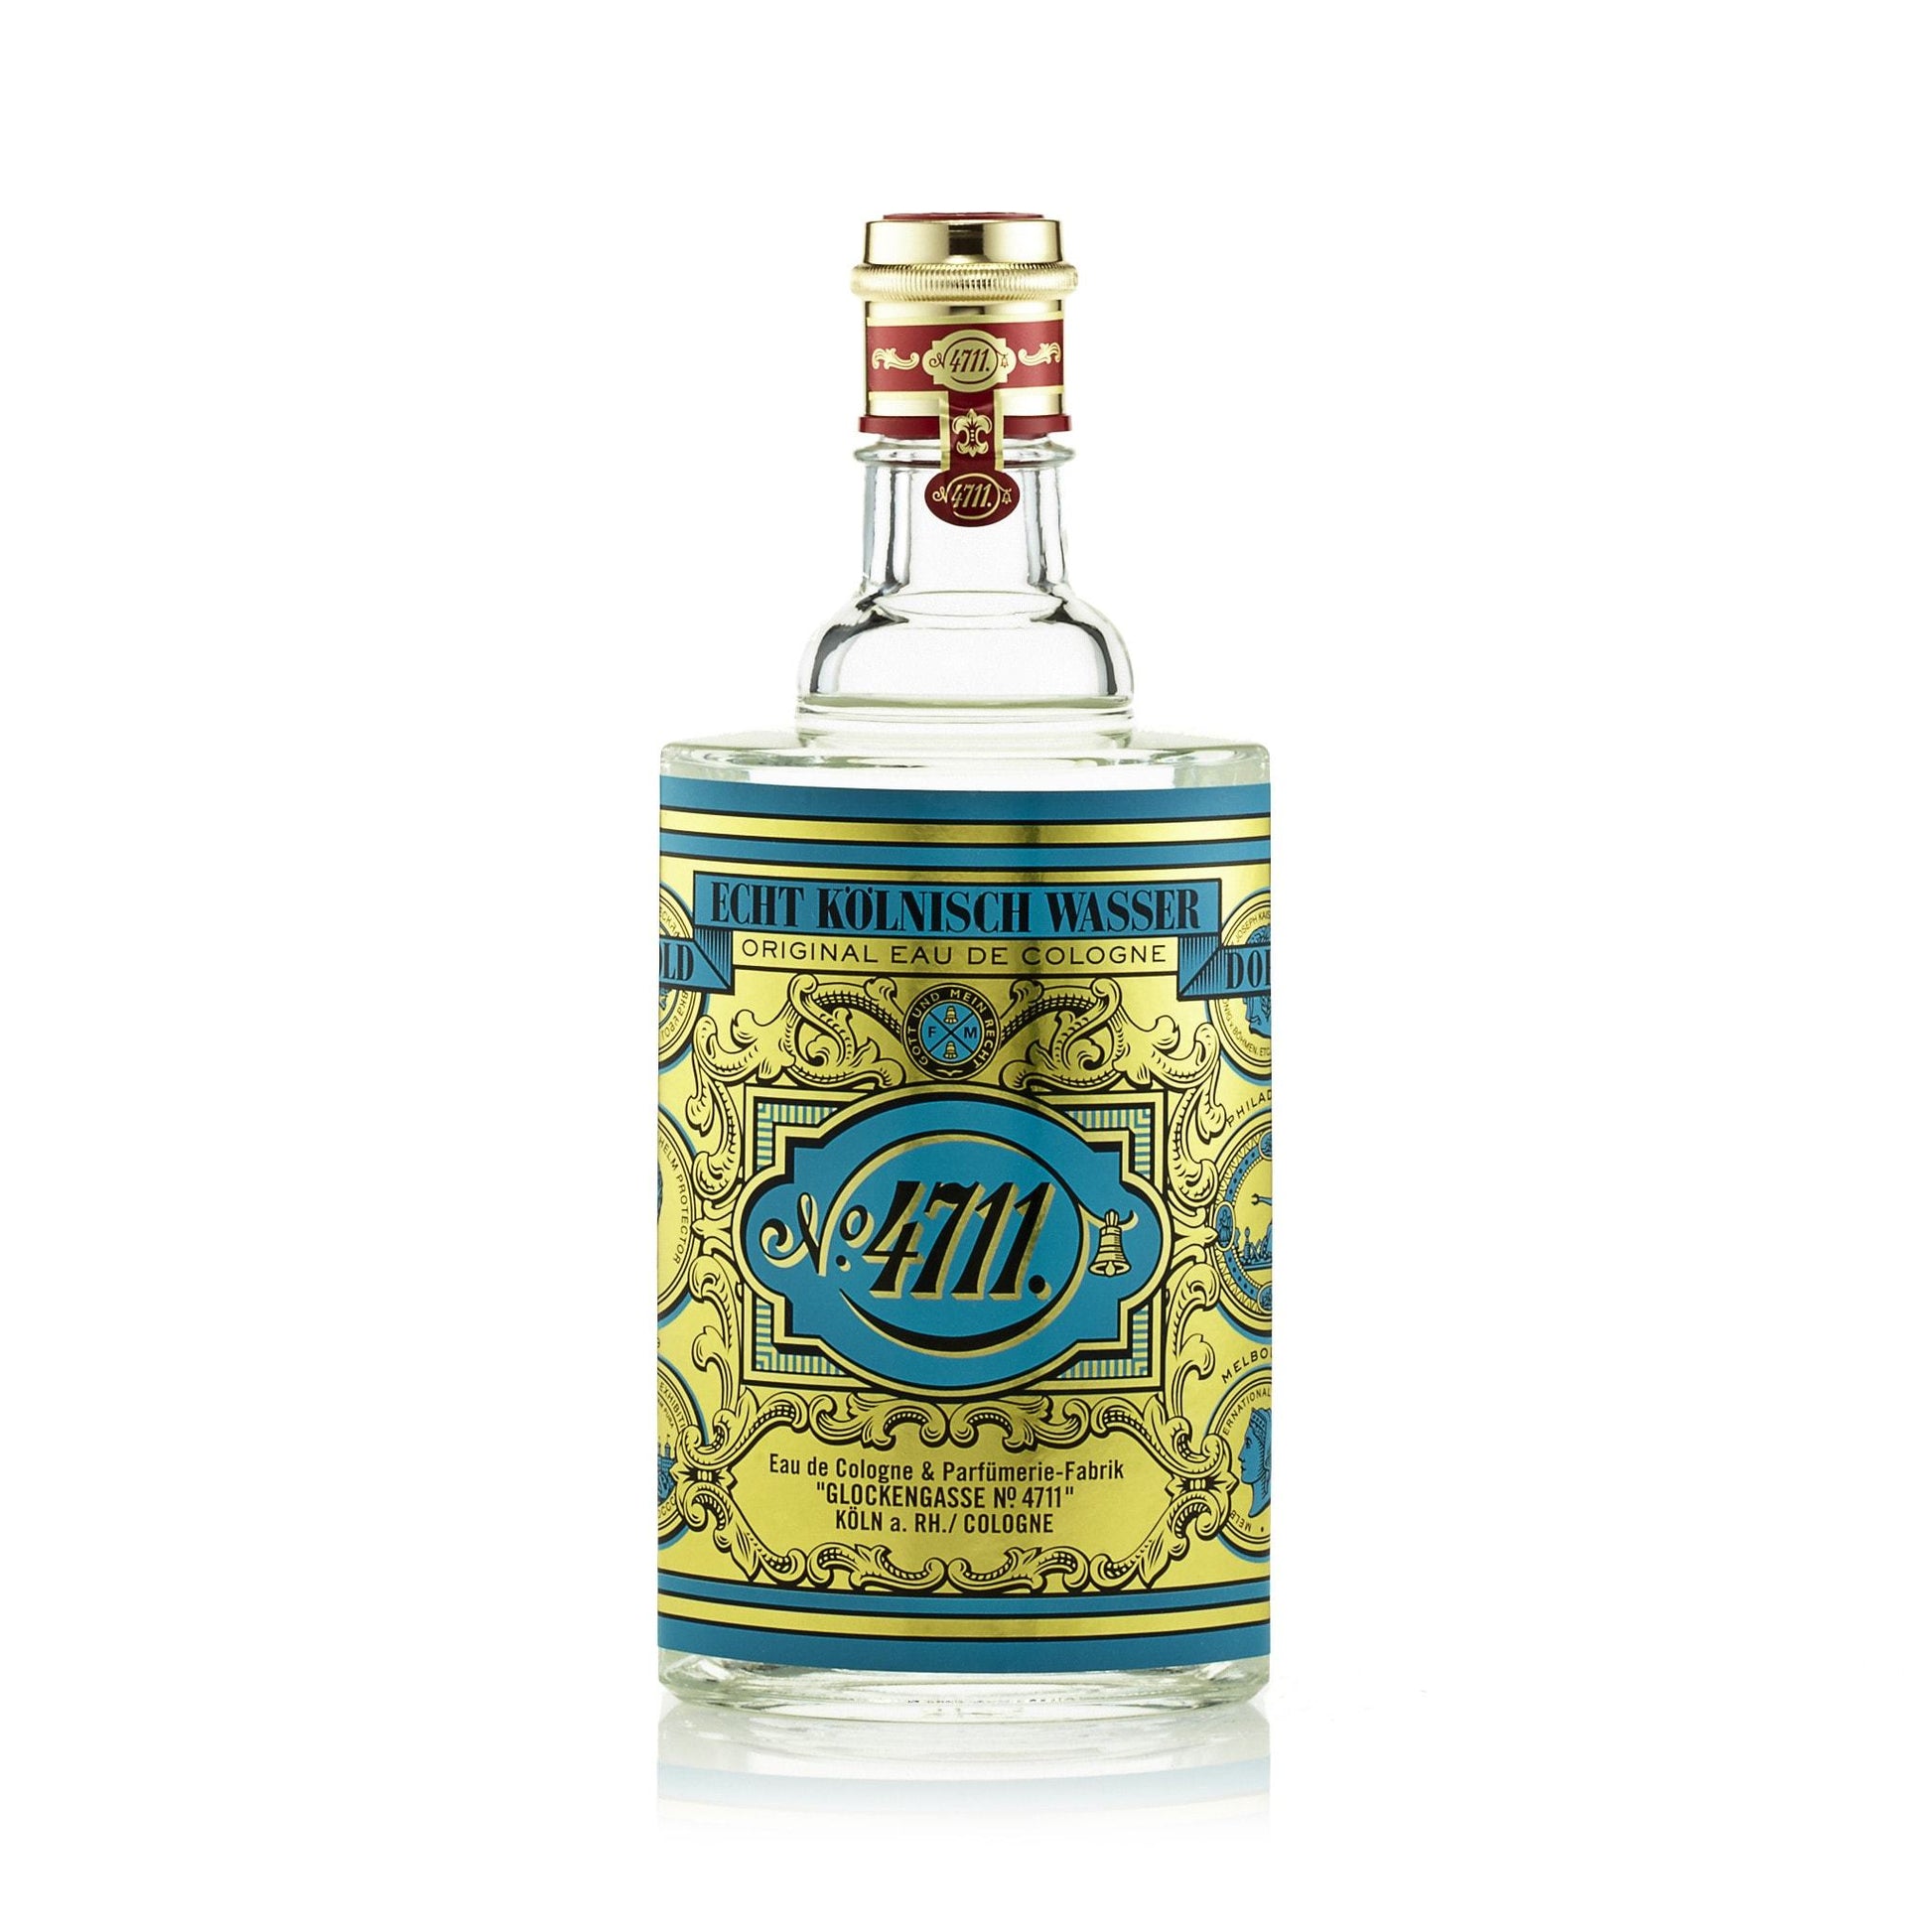 4711 Cologne by 4711, Product image 8